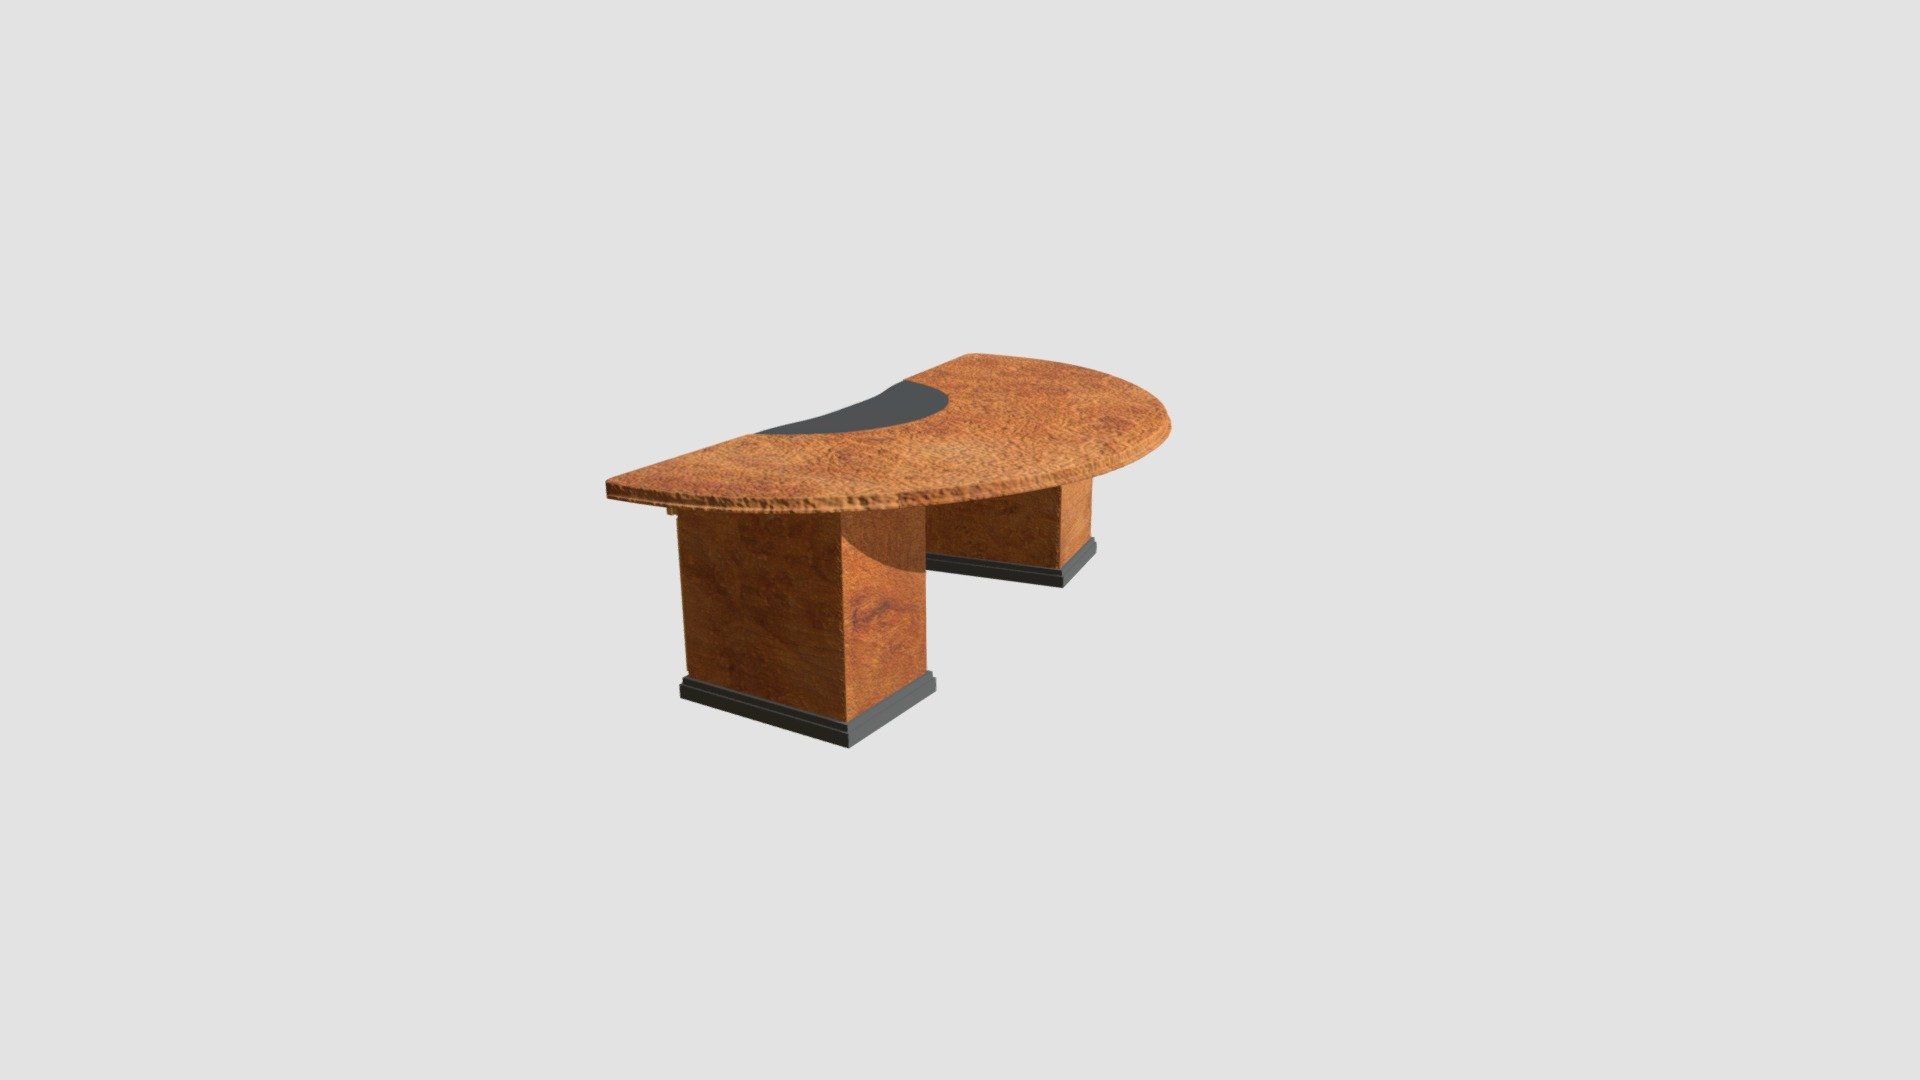 Highly detailed 3d model of desk with all textures, shaders and materials. It is ready to use, just put it into your scene 3d model